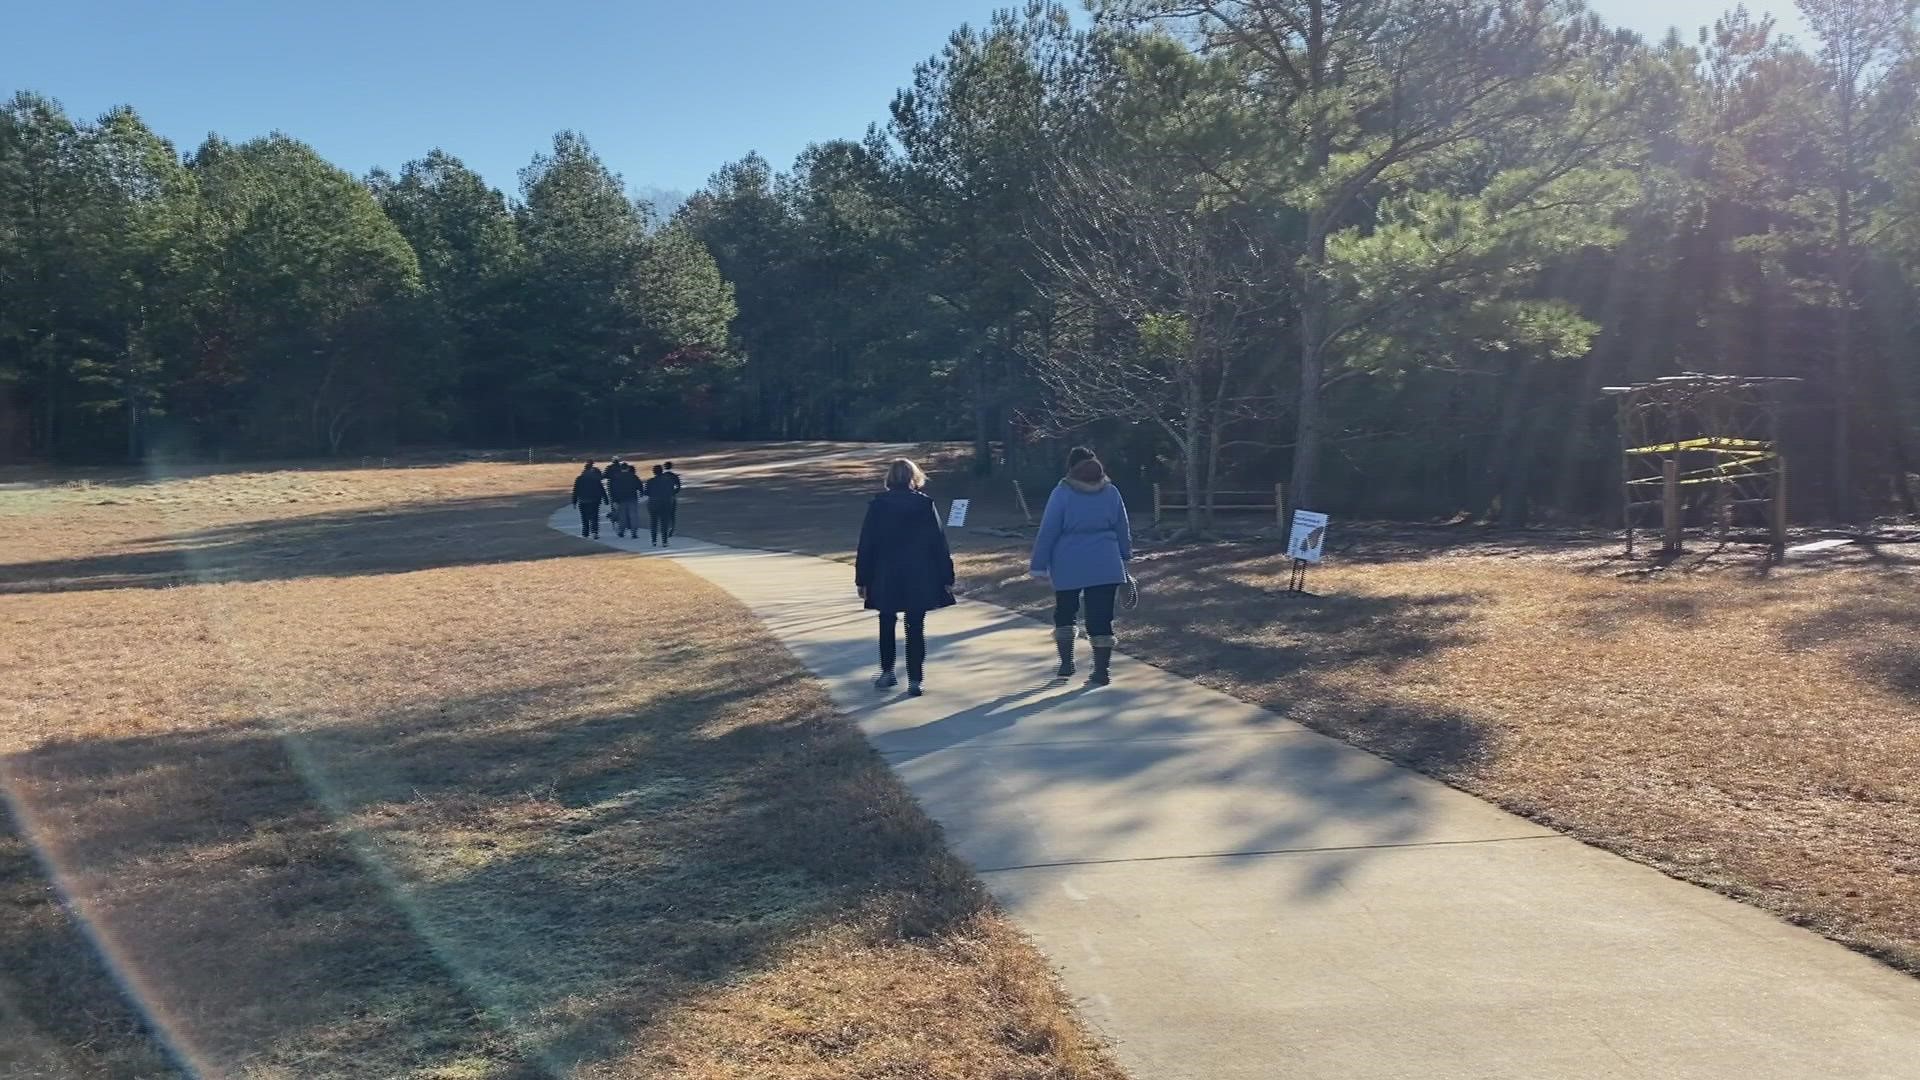 Folks came out to Amerson River Park to walk and stretch to kick off their New Year's resolutions.